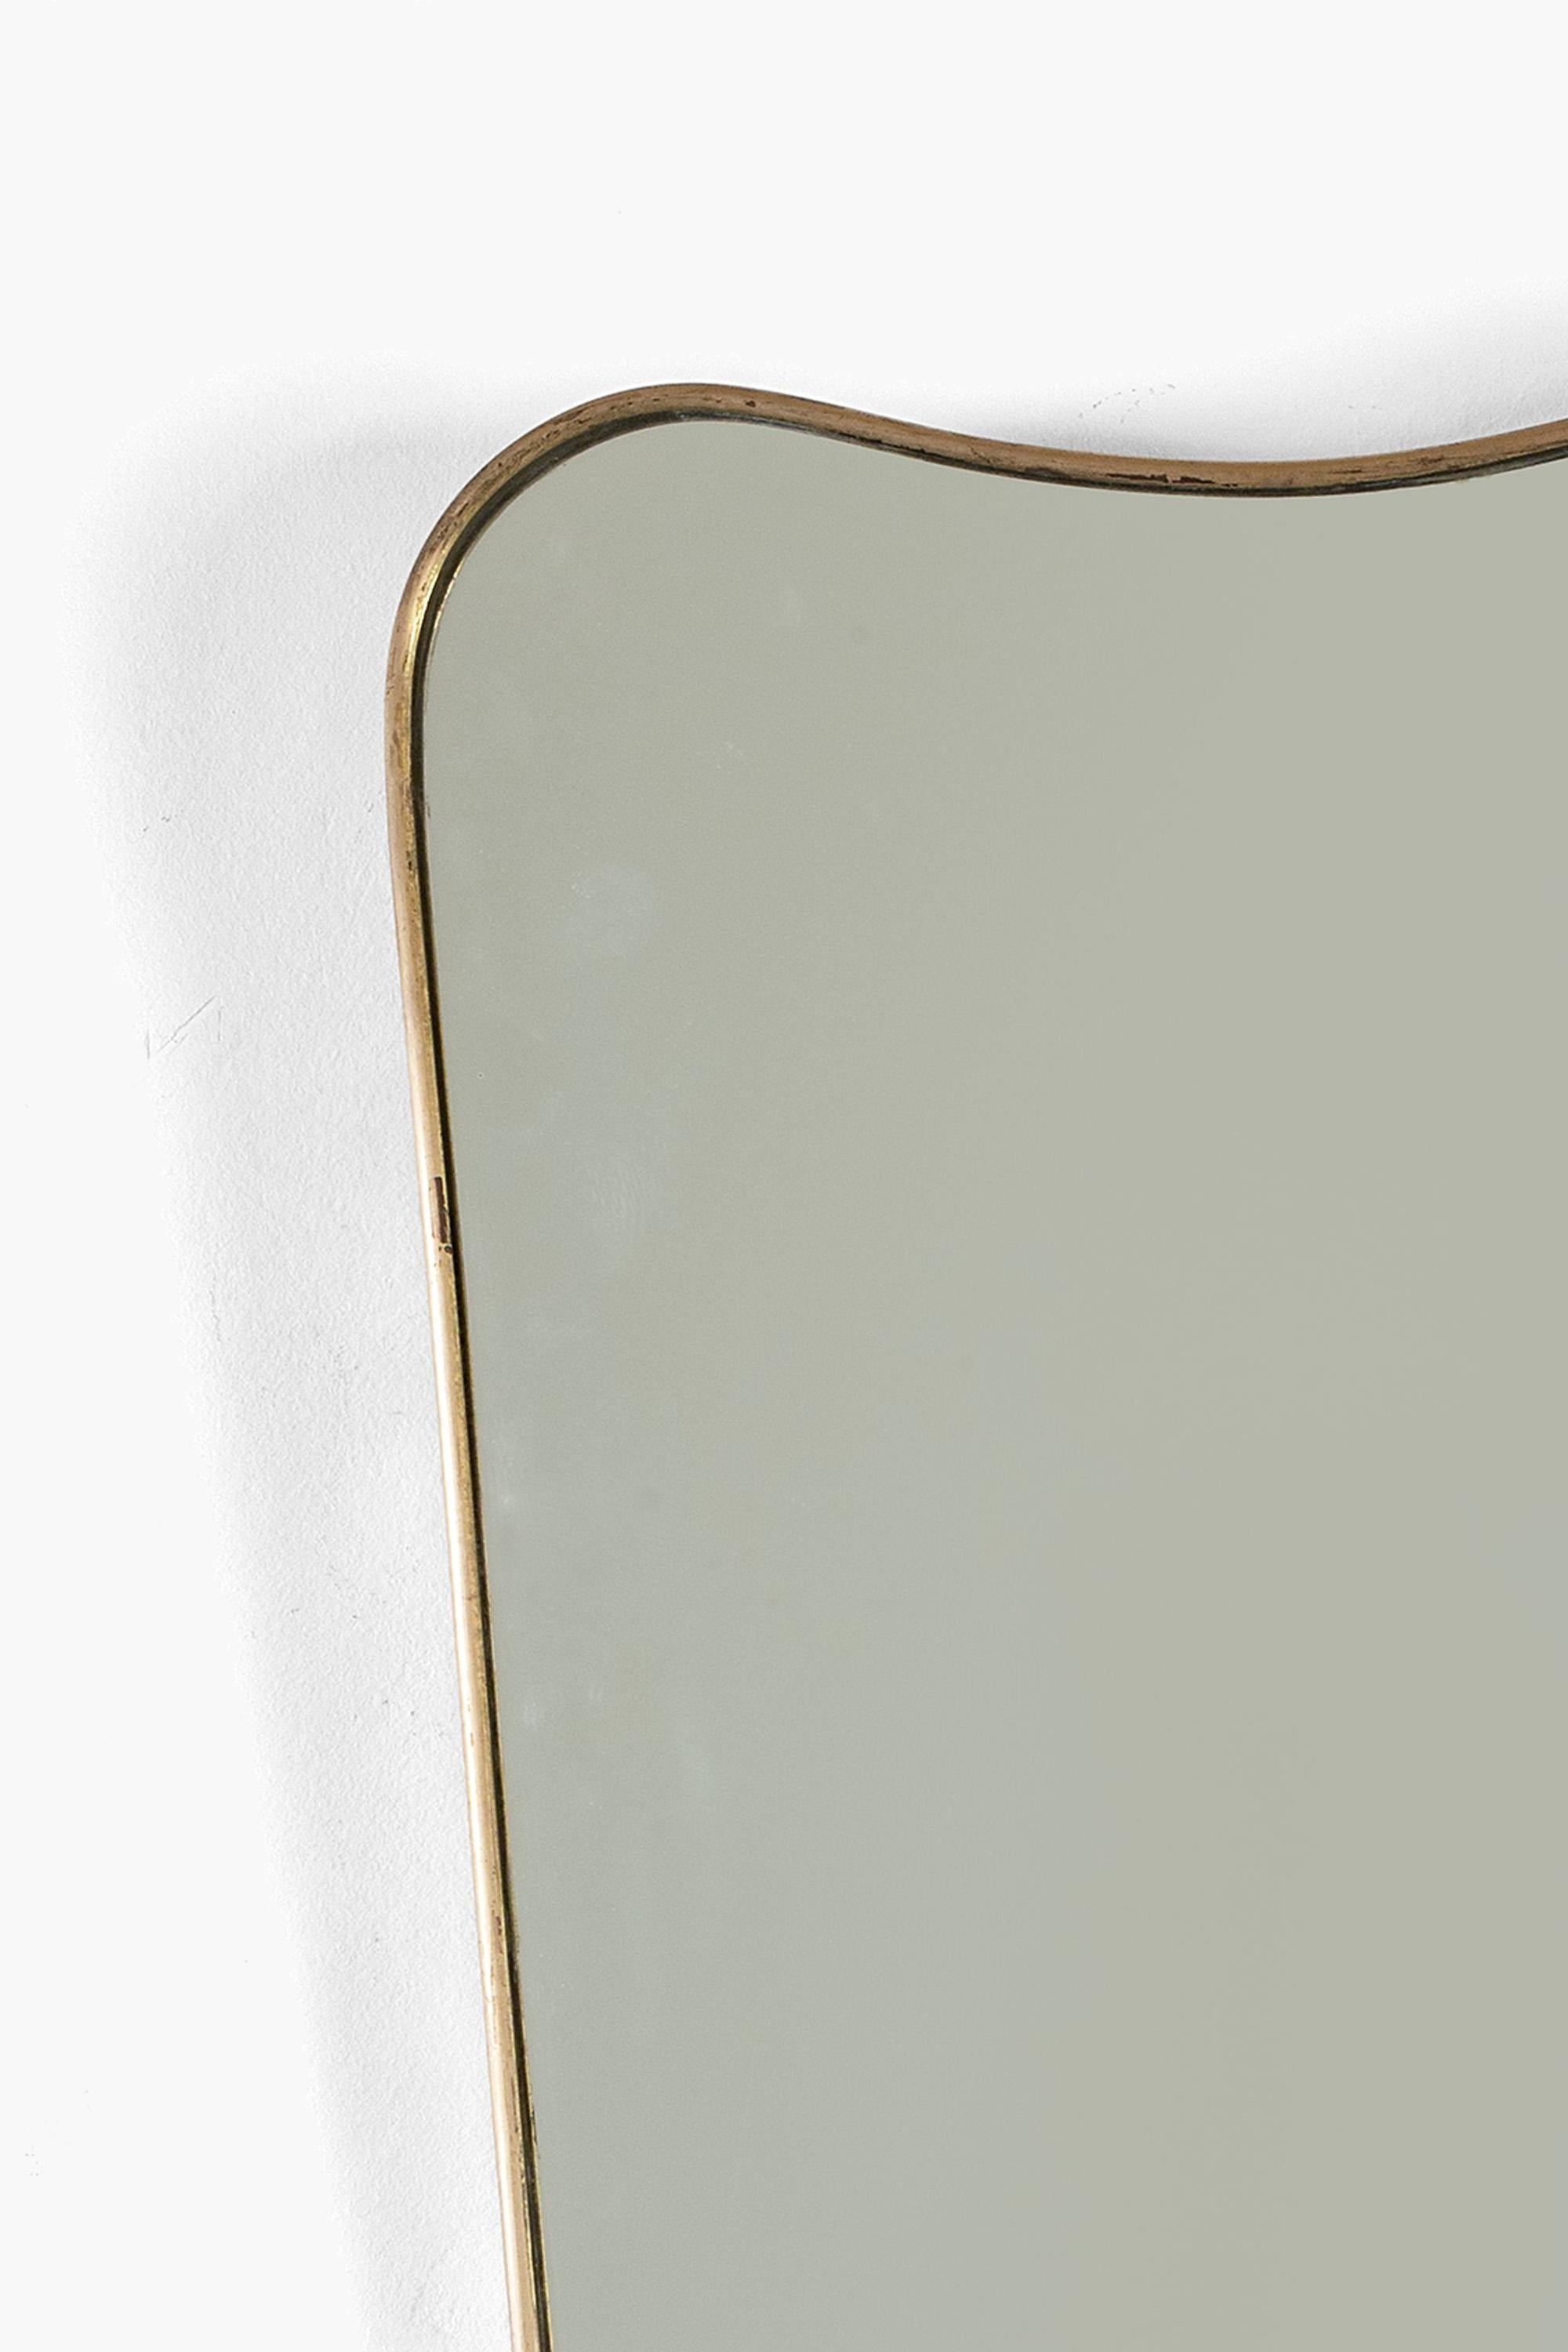 A 1950s production of the F.A.33 mirror designed by Gio Ponti for Fontana Arte in 1933.

Lovely original condition. Retains much of the original gilt finish, rubbed back in places to an antique brass.